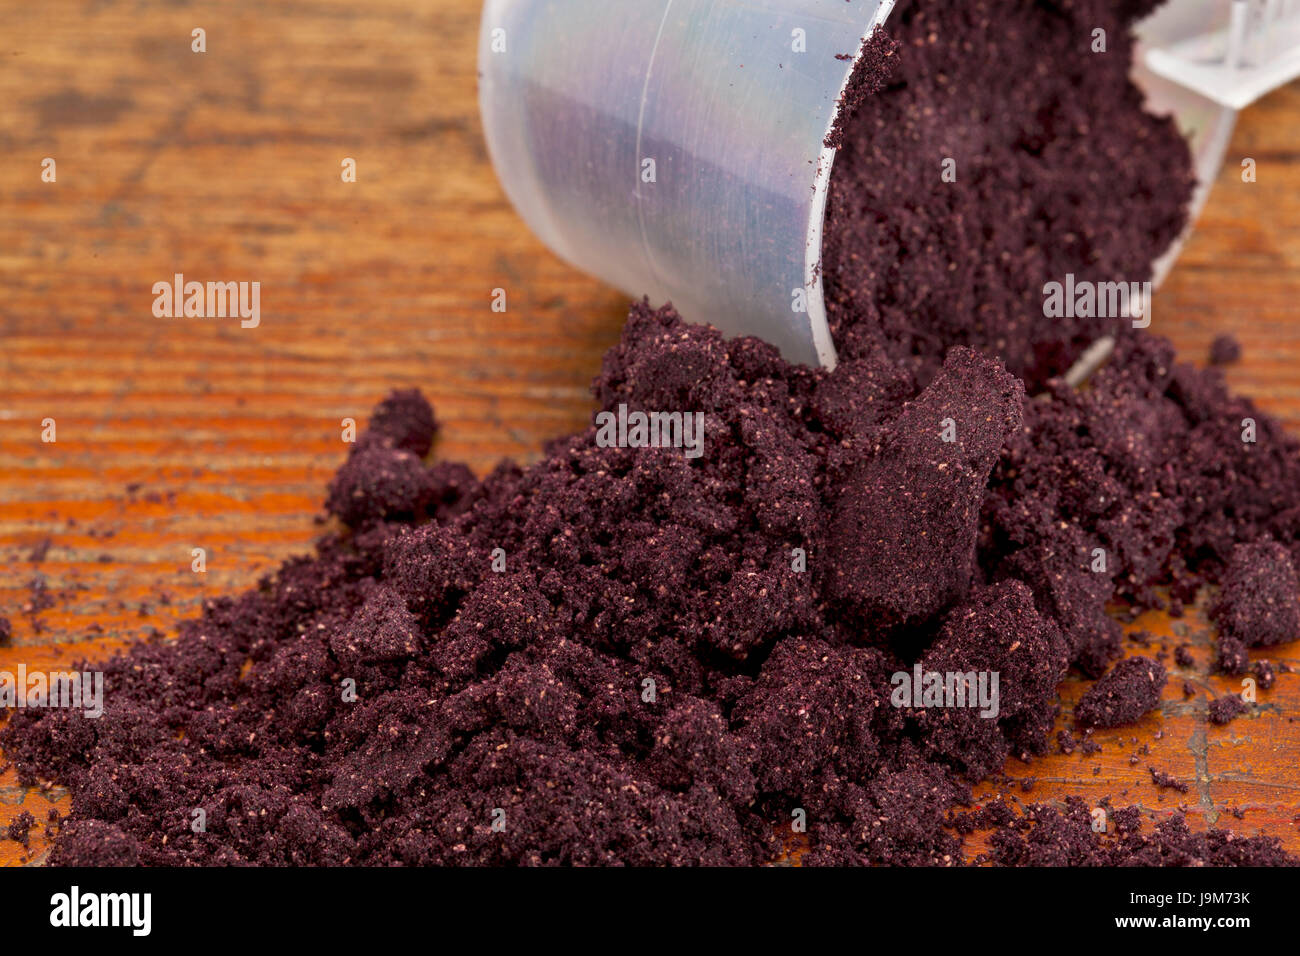 cup, fruit, powder, cup, wood, horizontal, fruit, dried, powder, nutrient, Stock Photo